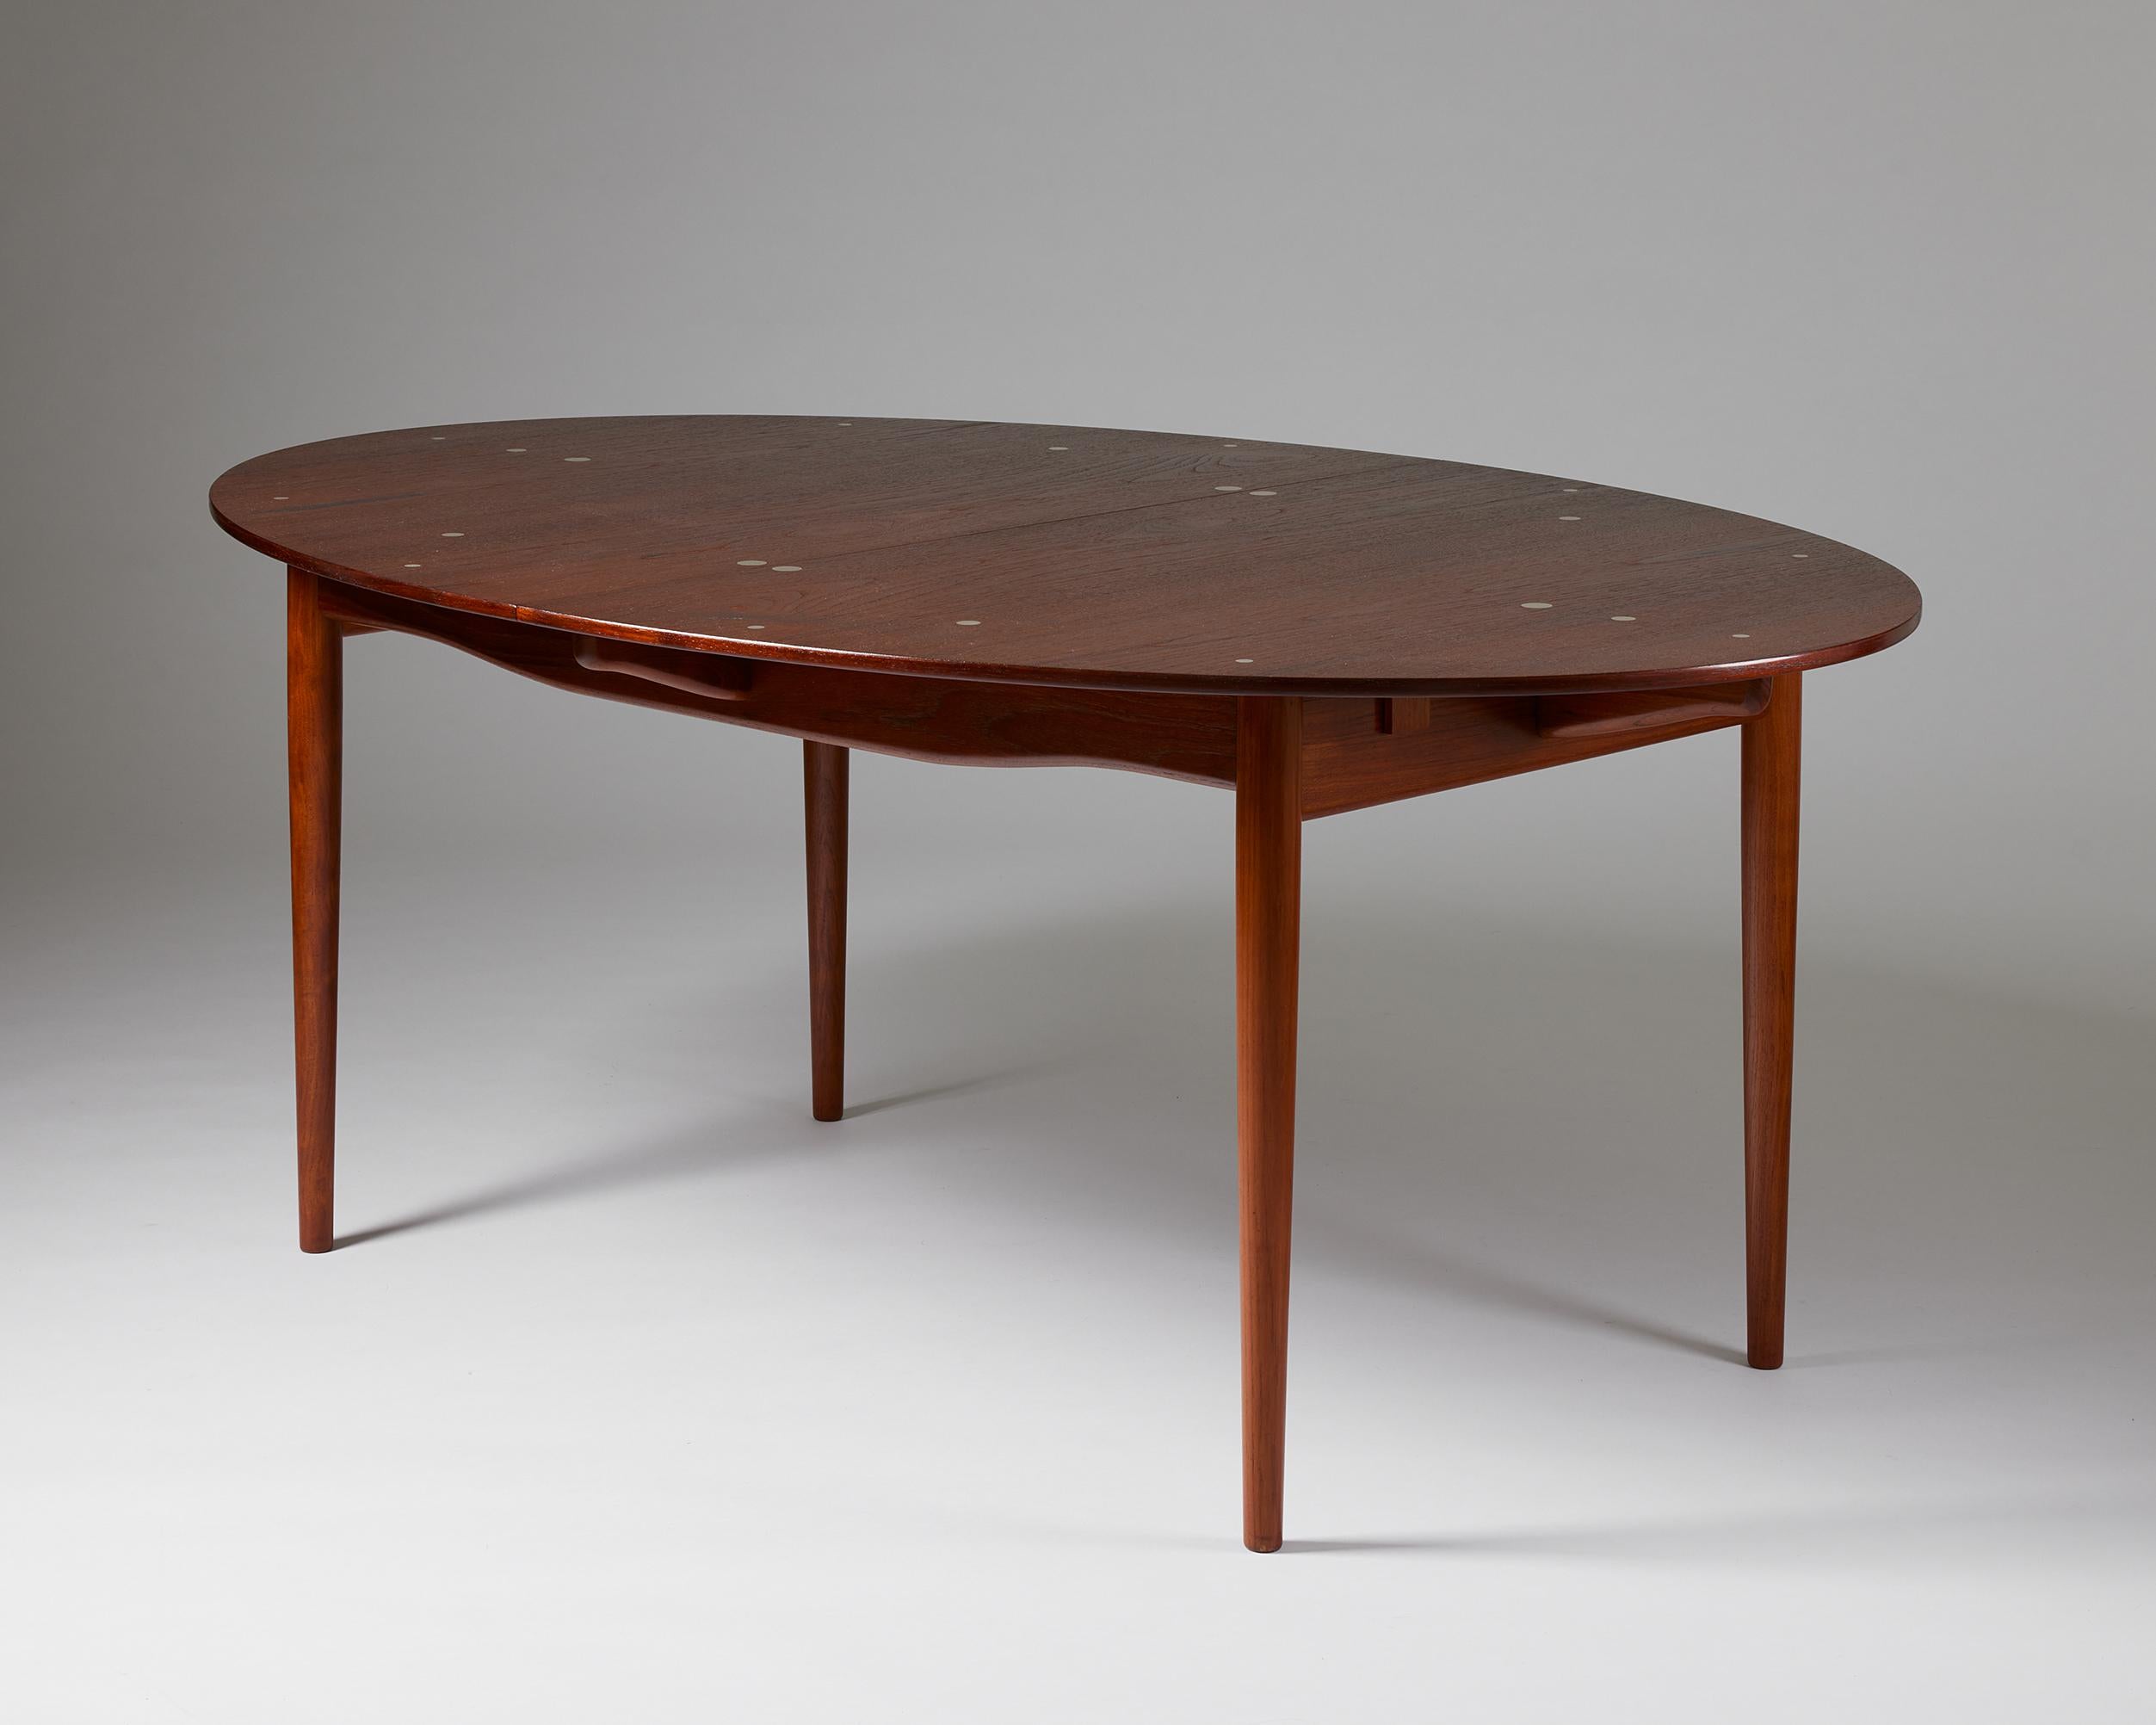 Dining table ‘Judas’ with extensions designed by Finn Juhl for Niels Vodder,
Denmark, 1948.

Teak and circular silver inlays.

Stamped.

Provenance: From a private Danish collection.

The 'Judas' table deserves to be seen as the embodiment of